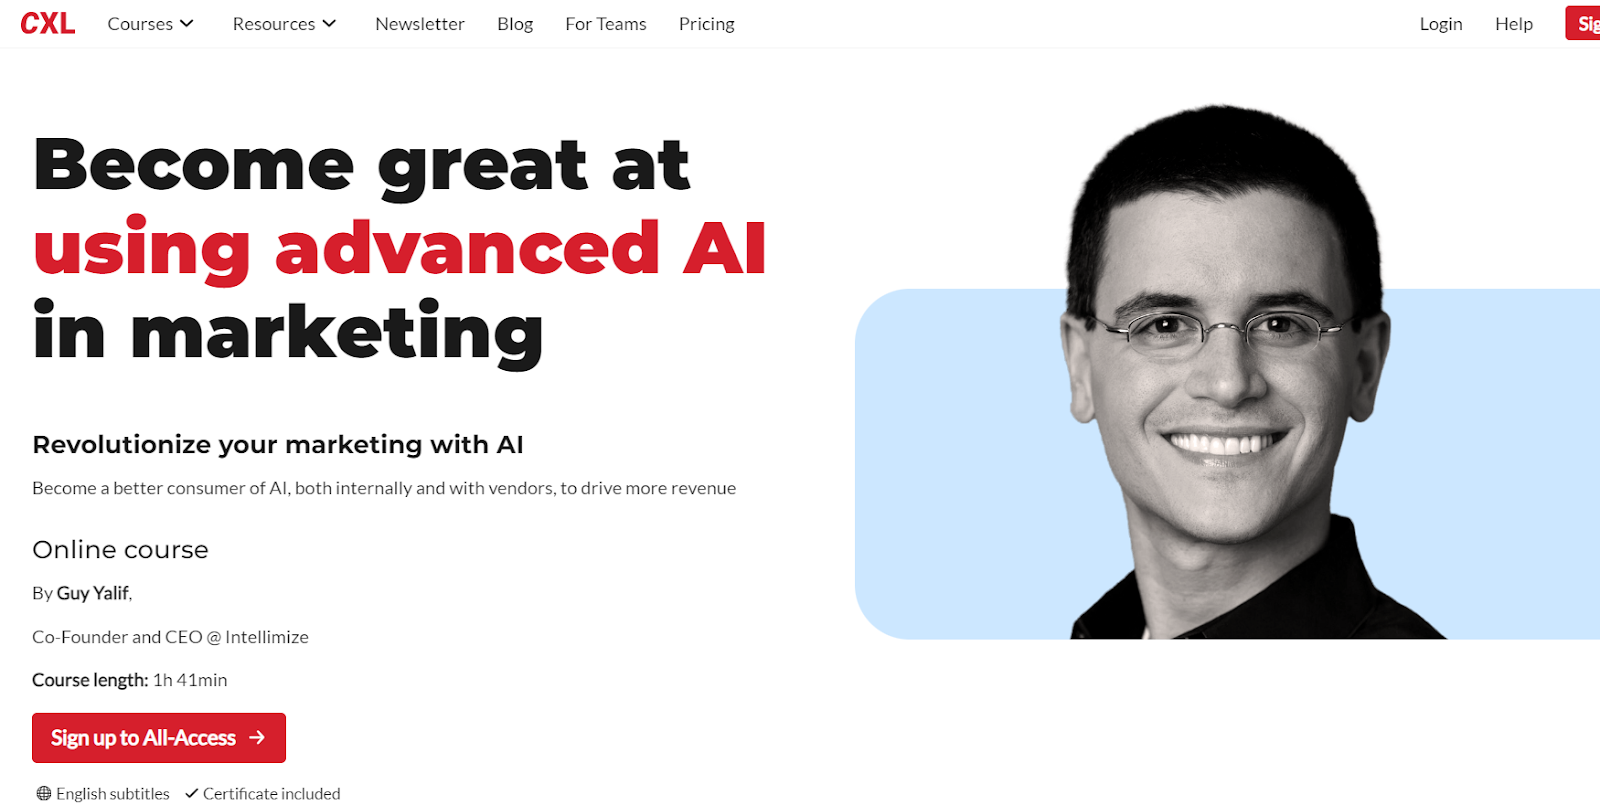 Become great at using advanced AI in marketing